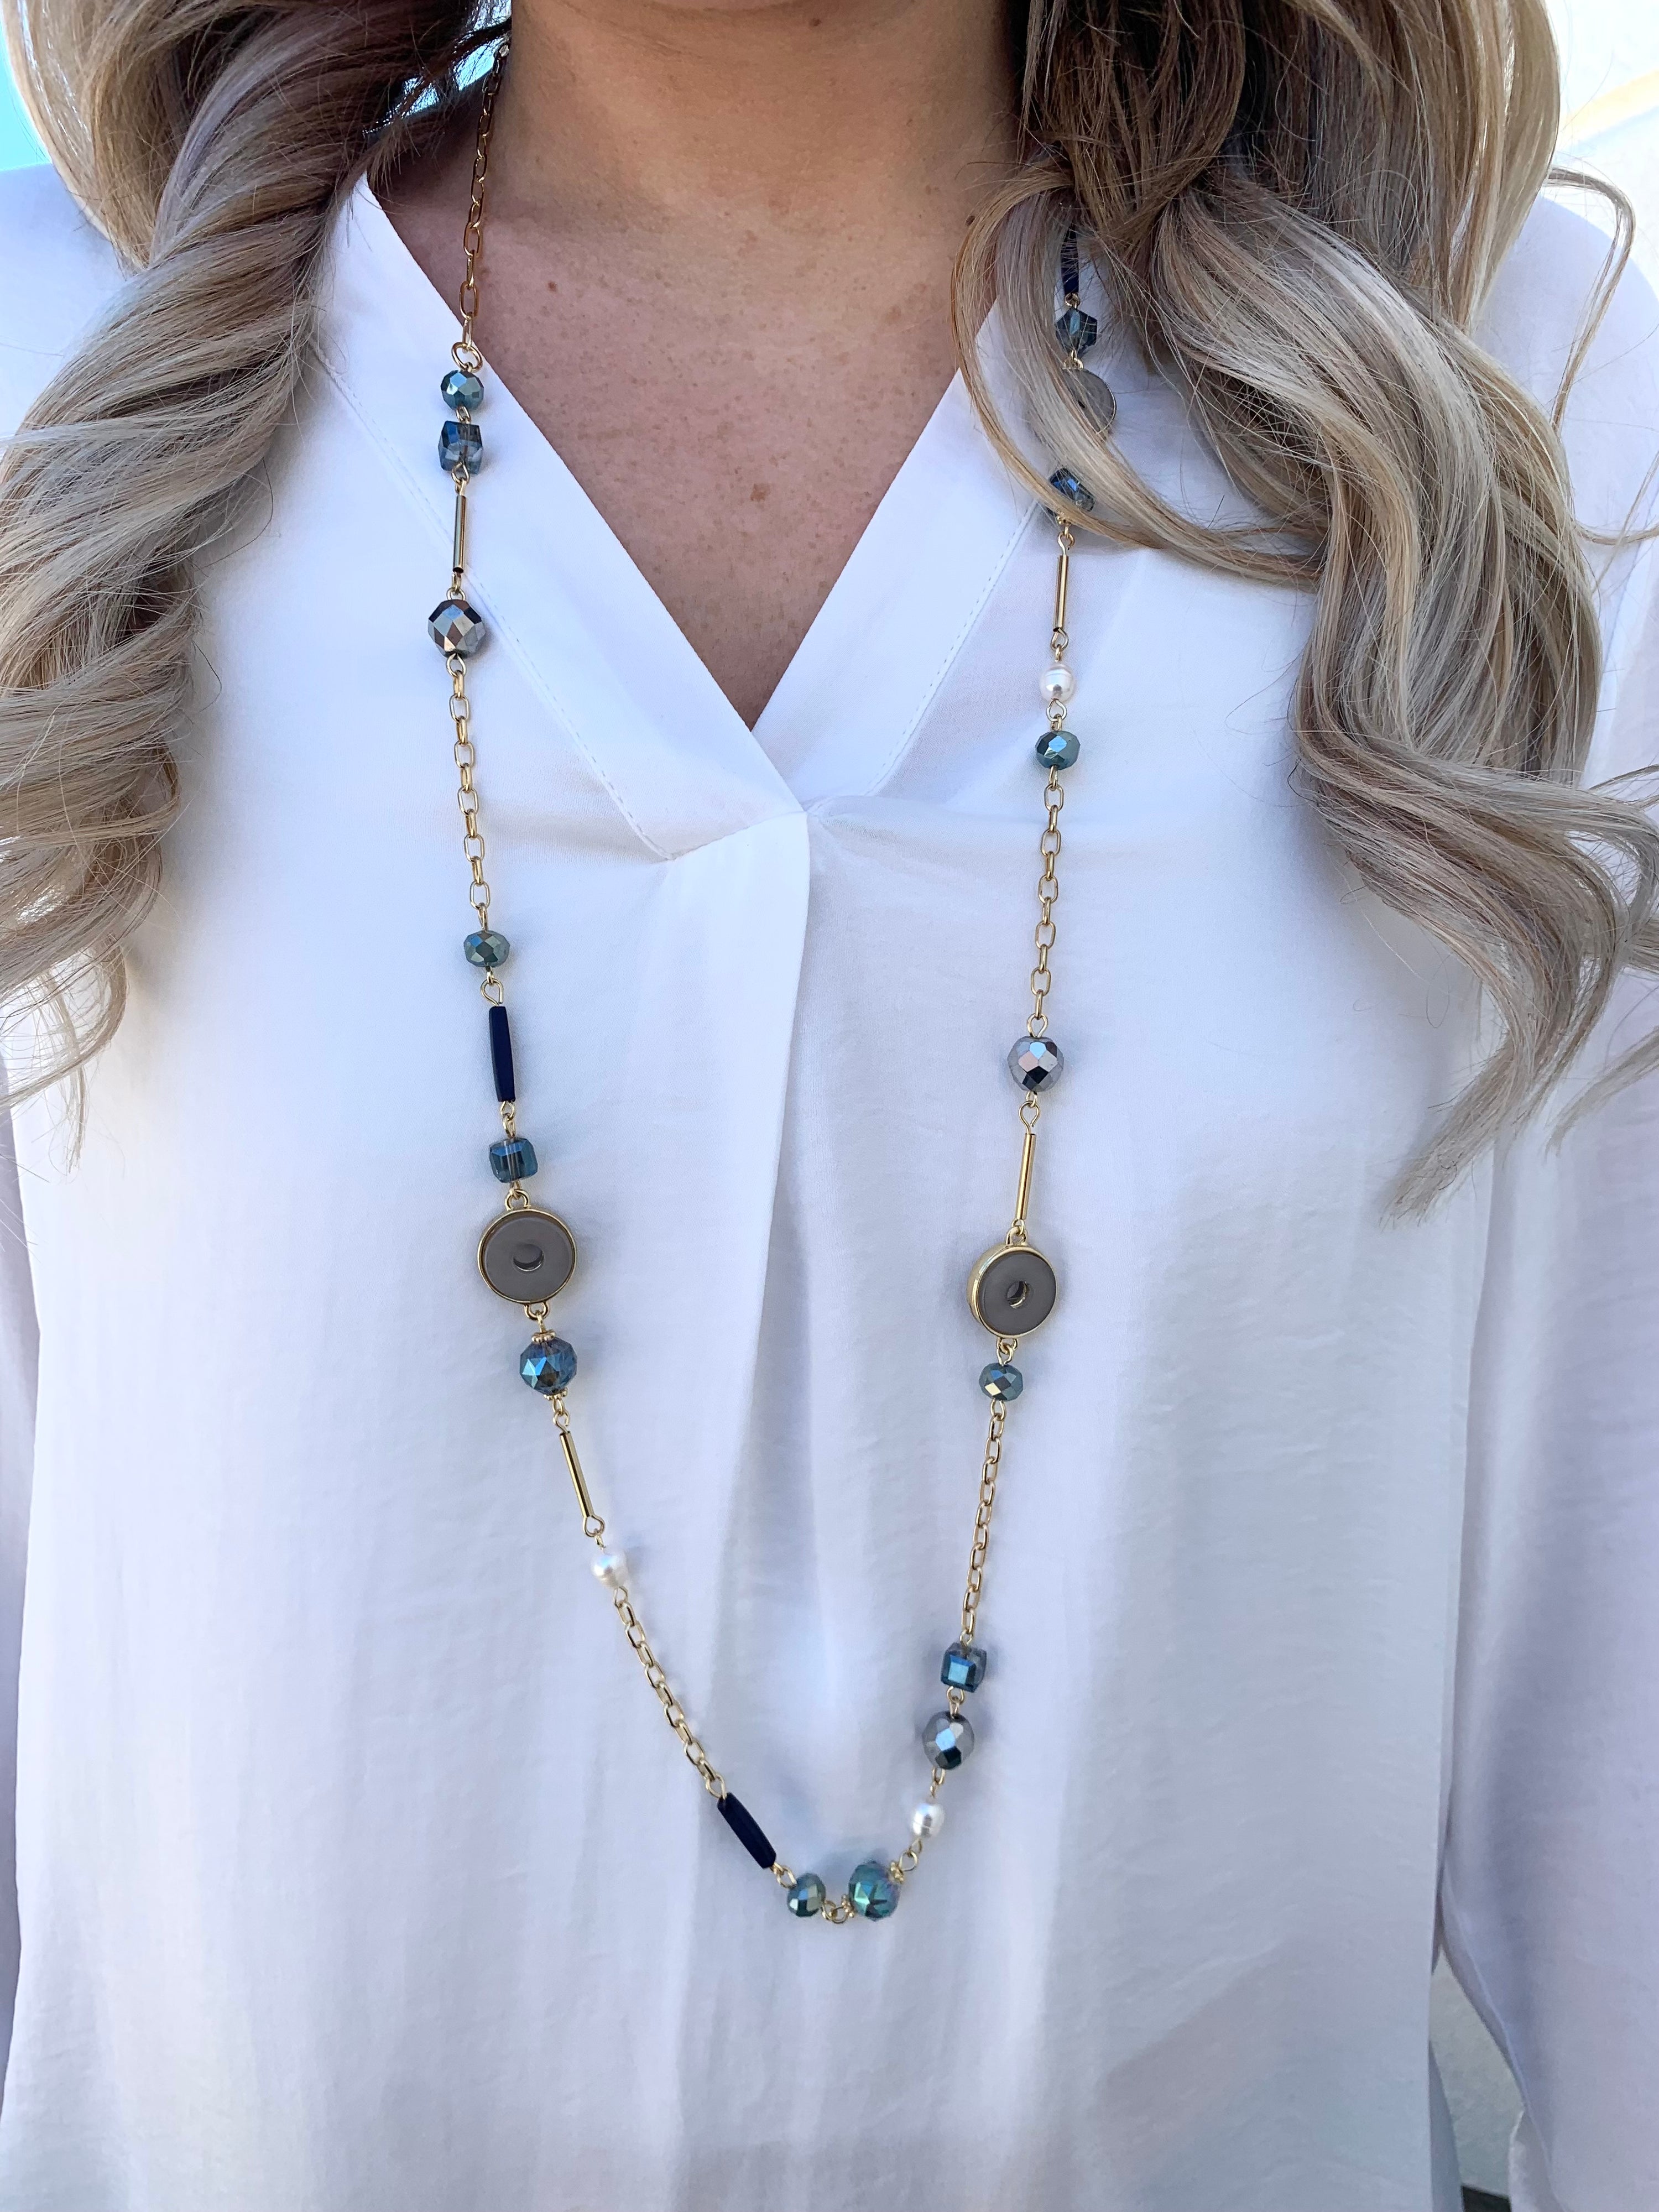 Faryn Necklace. Gold chained with blue and pearl bead accents on model.